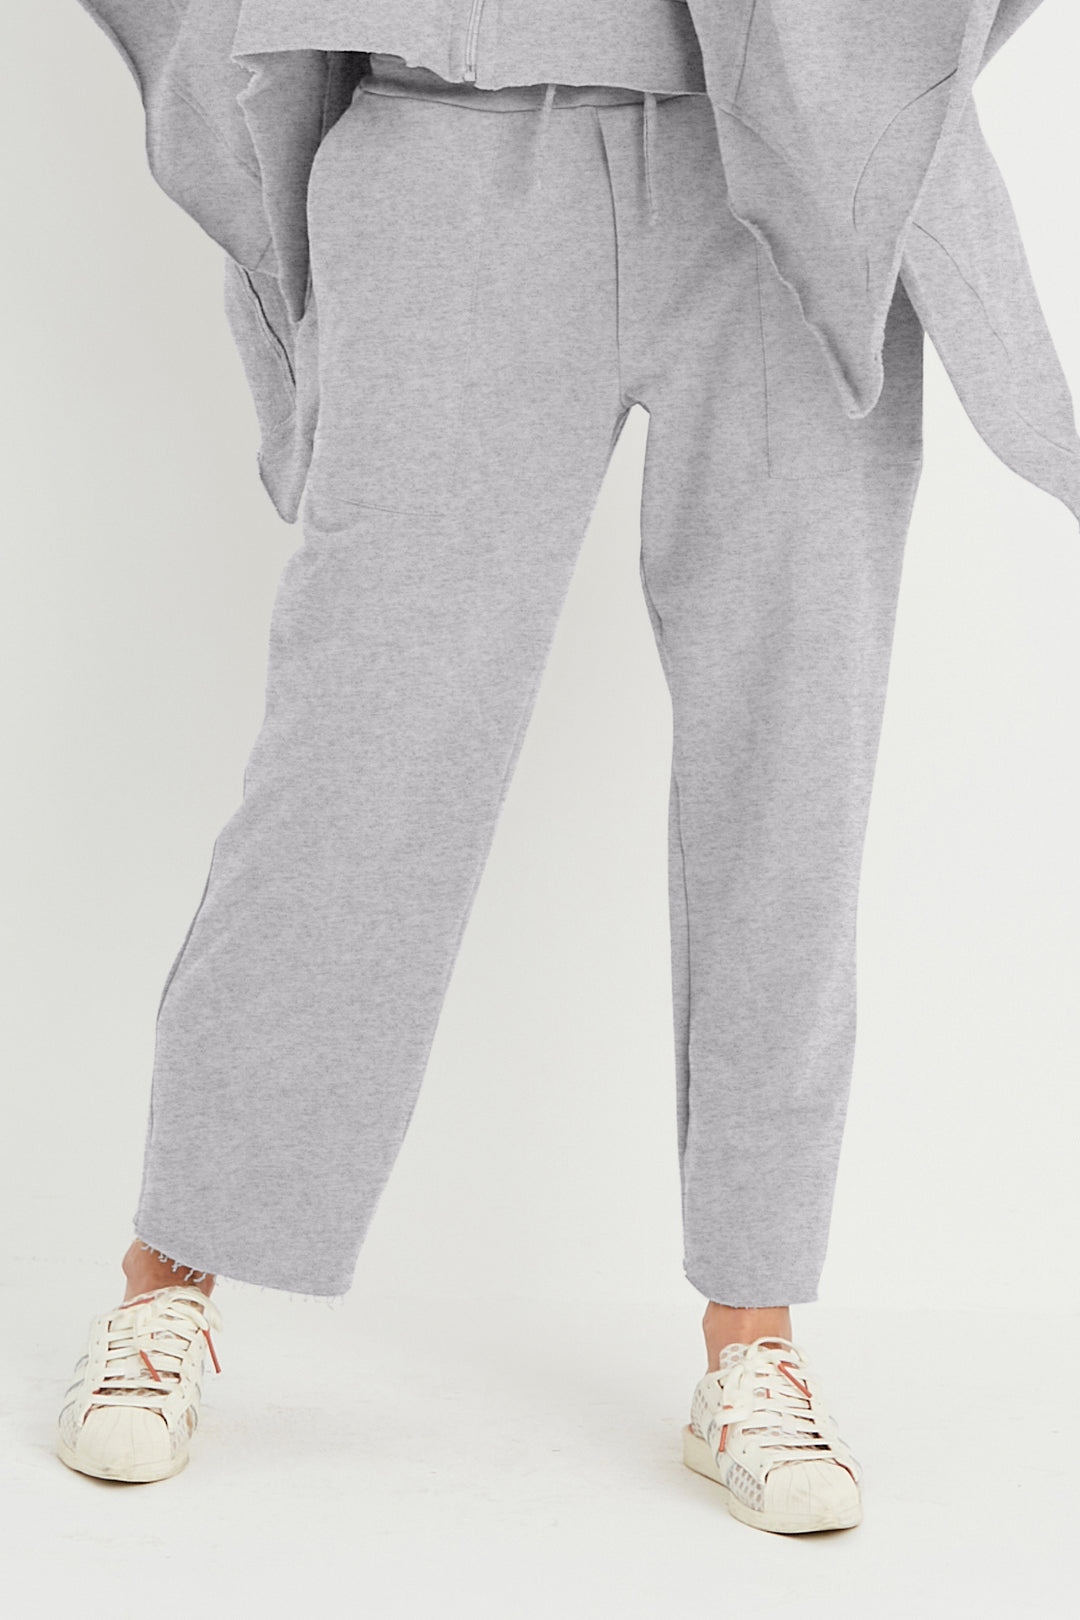 French Terry Luxury Sweatpants